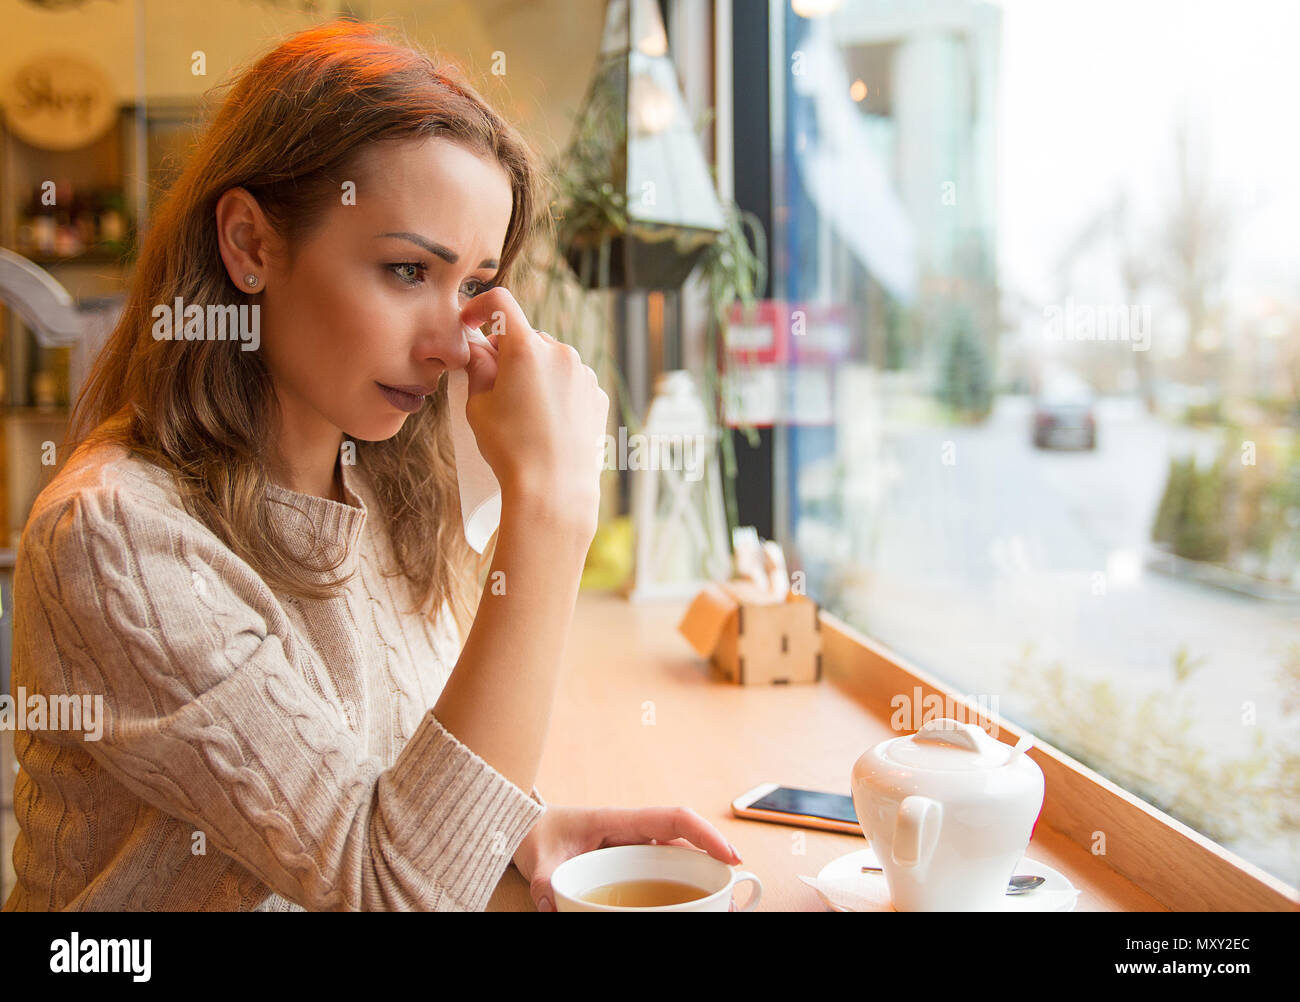 Young girl in sorrow crying after breakup sitting with cup of tea at table in cafeteria near window Stock Photo